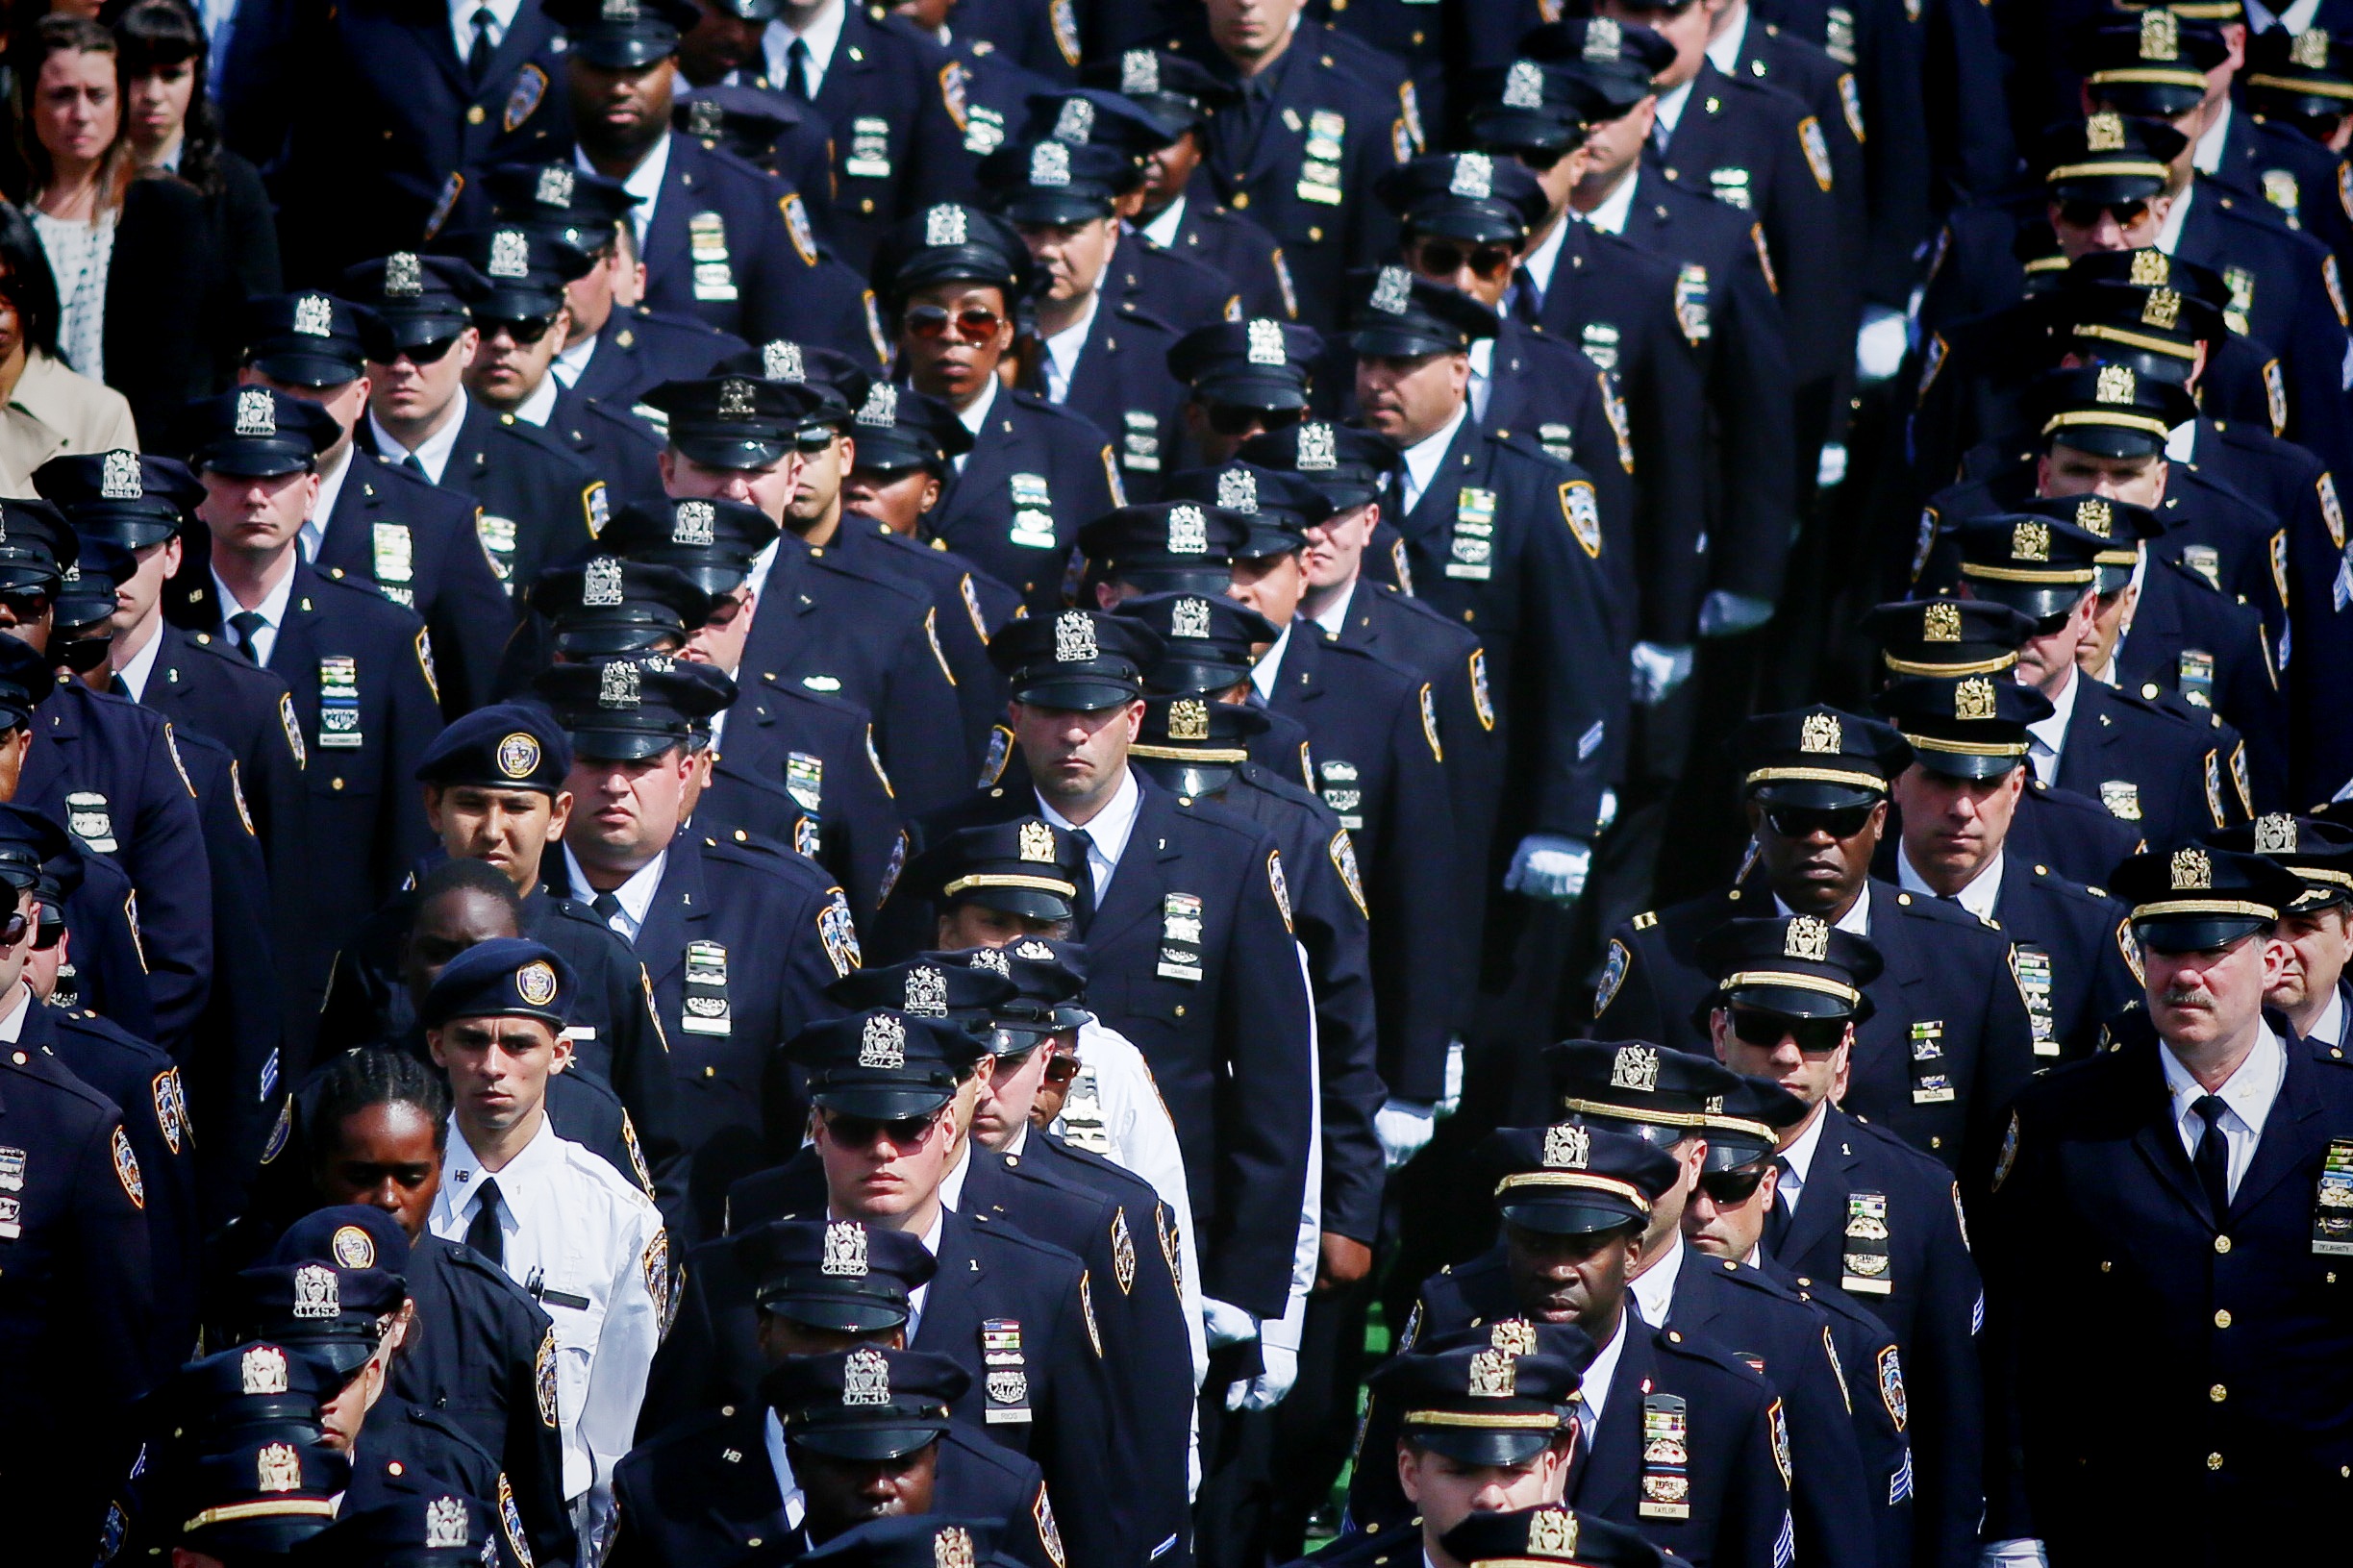  NYPD funeral for Dennis Guerra, a NYPD officer who died in a fire in a Coney Island high rise.&nbsp; 